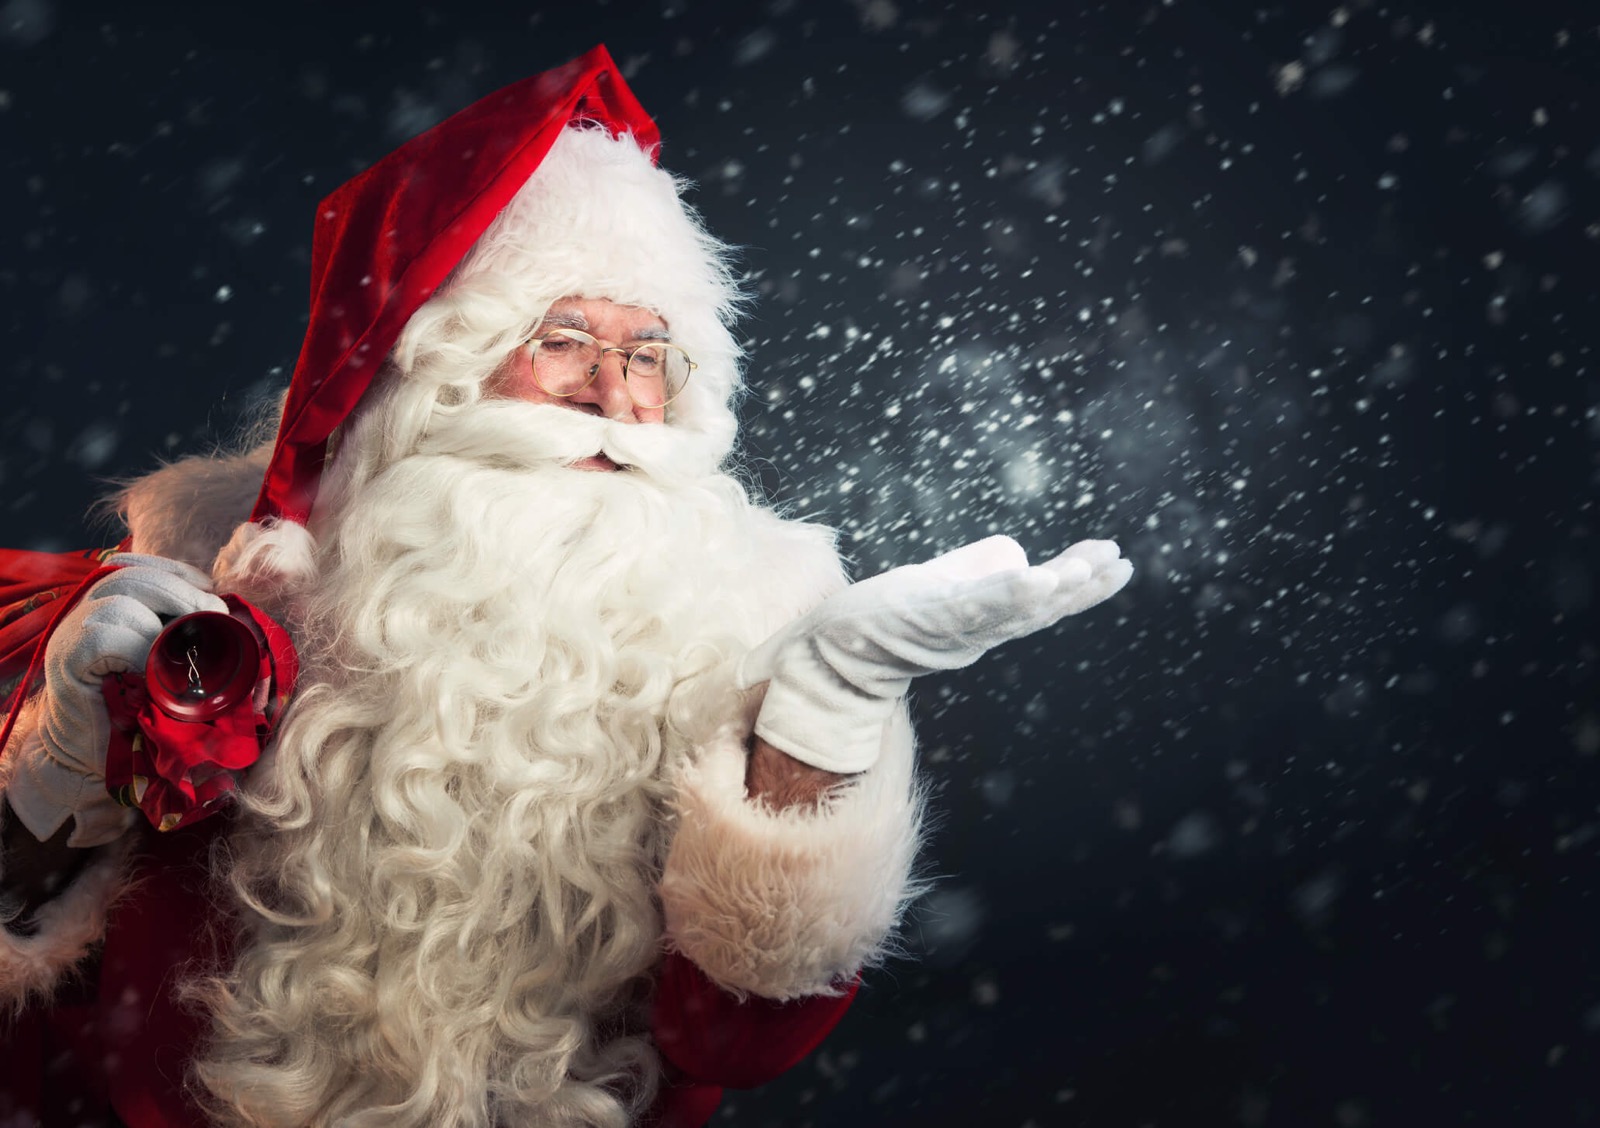 So You’re a Trivia Expert? Prove It by Answering All 22 of These True/False Questions Correctly Santa Claus